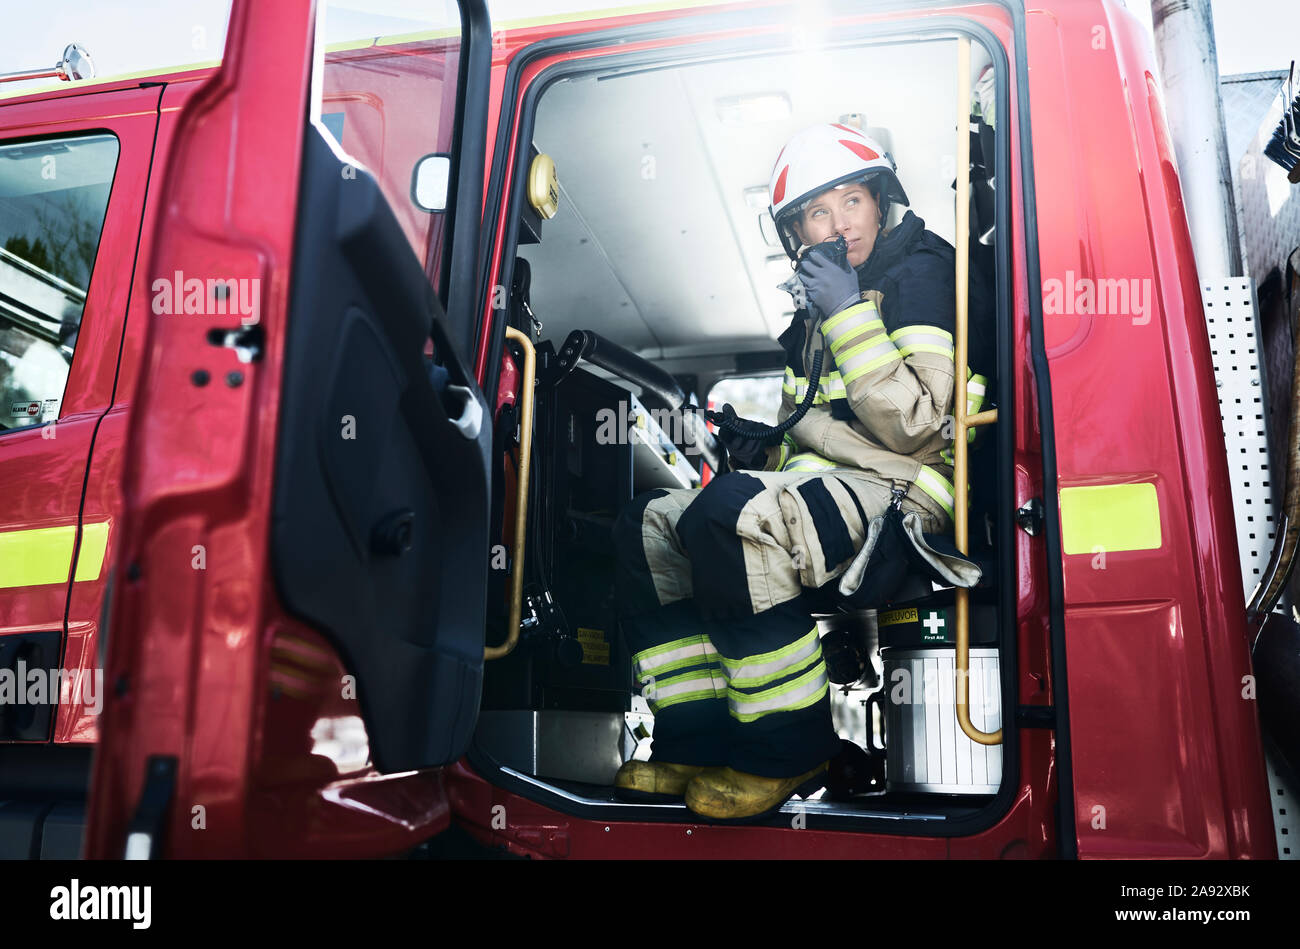 Firefighter in car Stock Photo